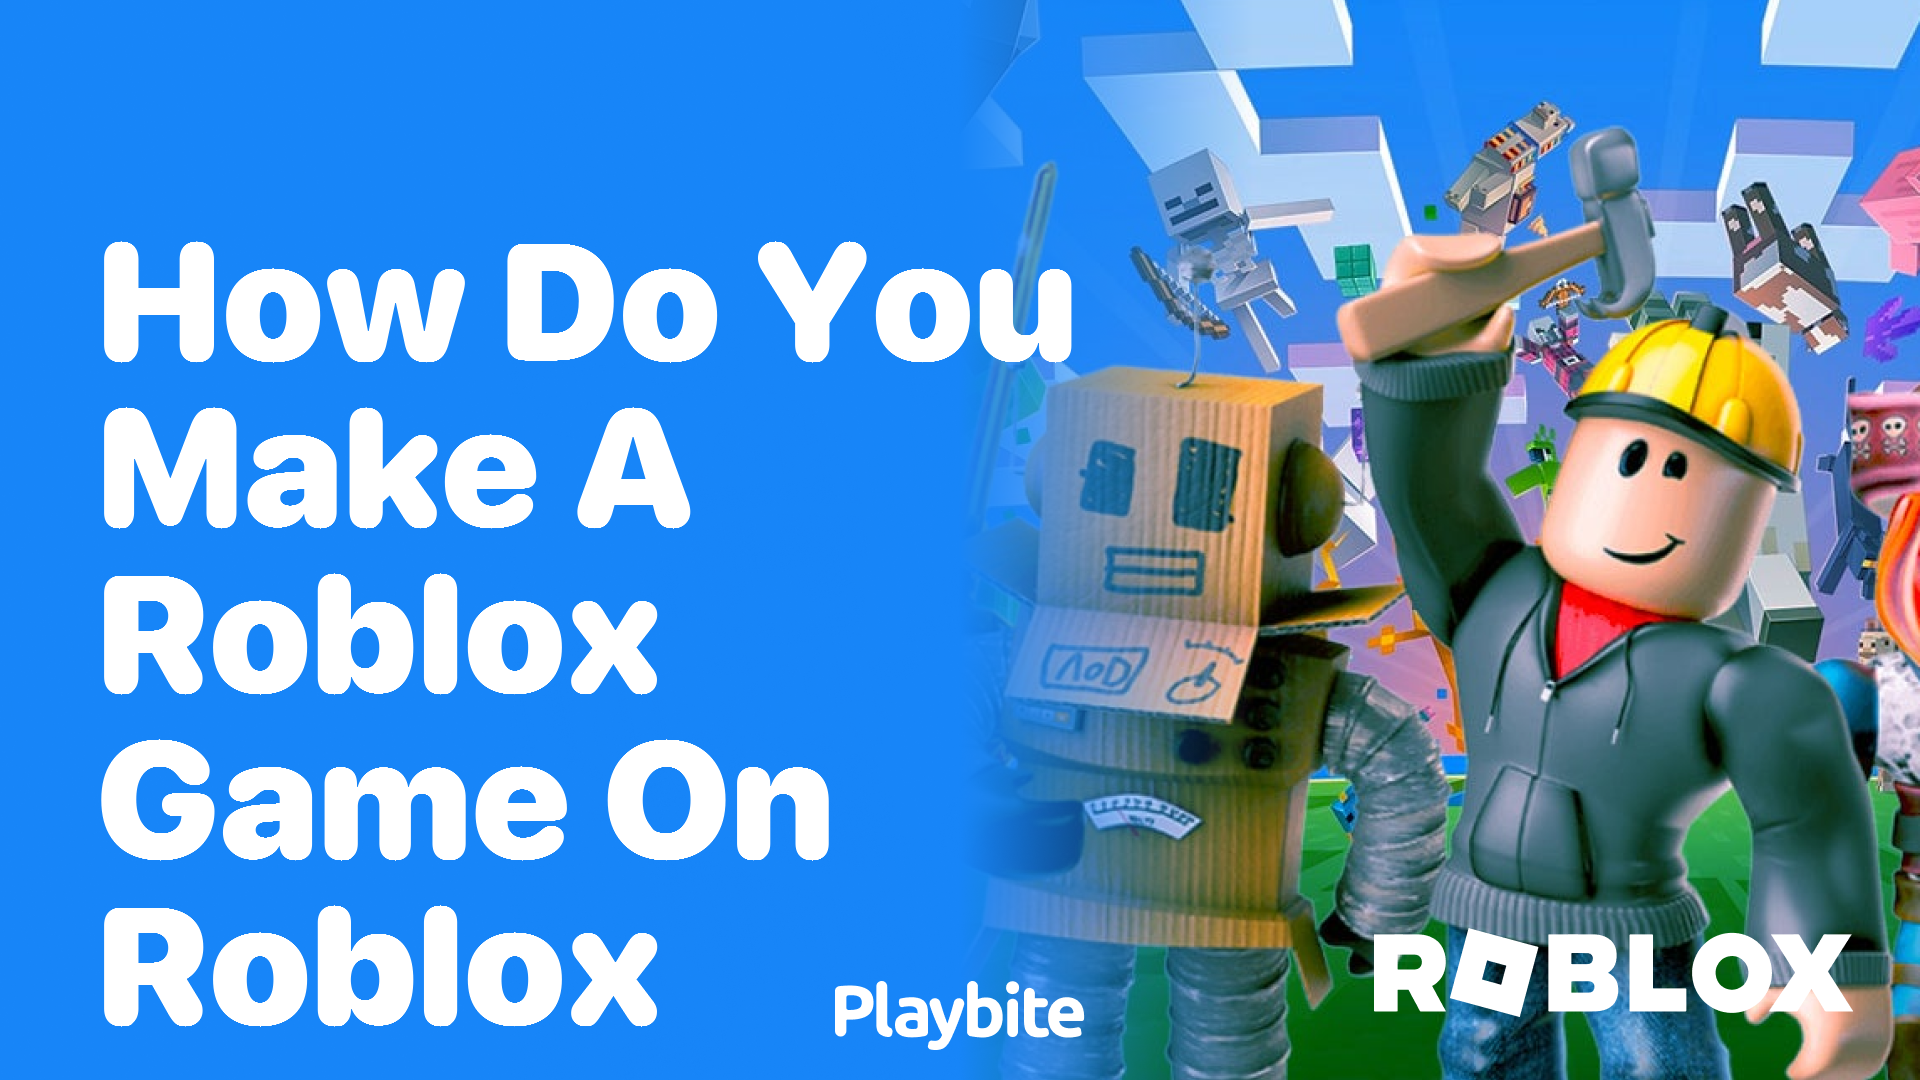 How Do You Make a Roblox Game on Roblox?